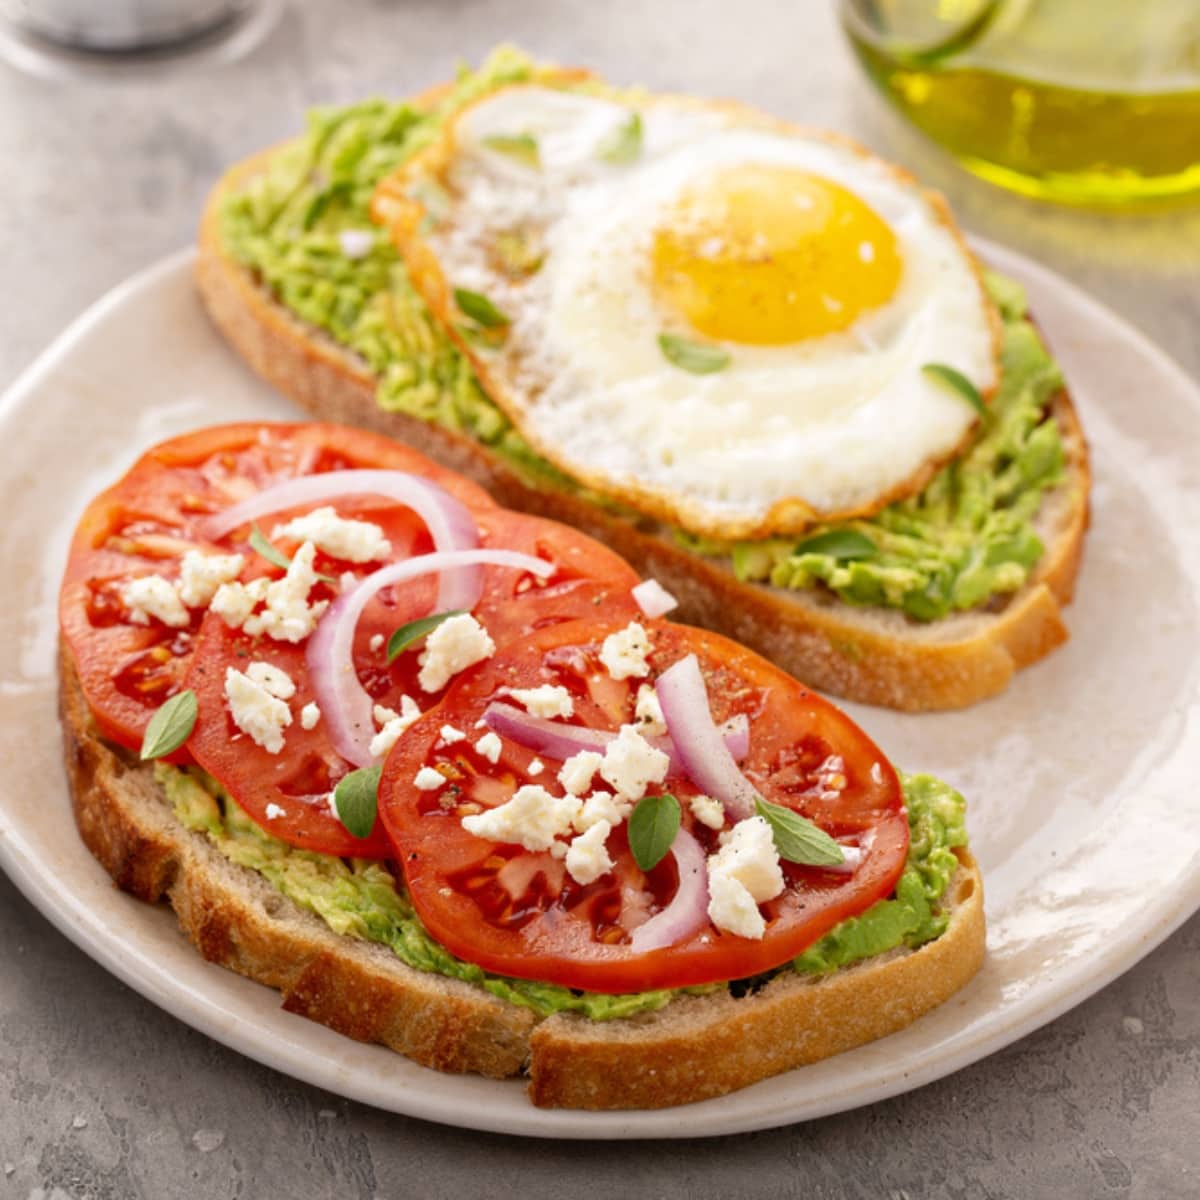 Avocado Toasts For Breakfast With Fried Egg And Heirloom Tomatoes